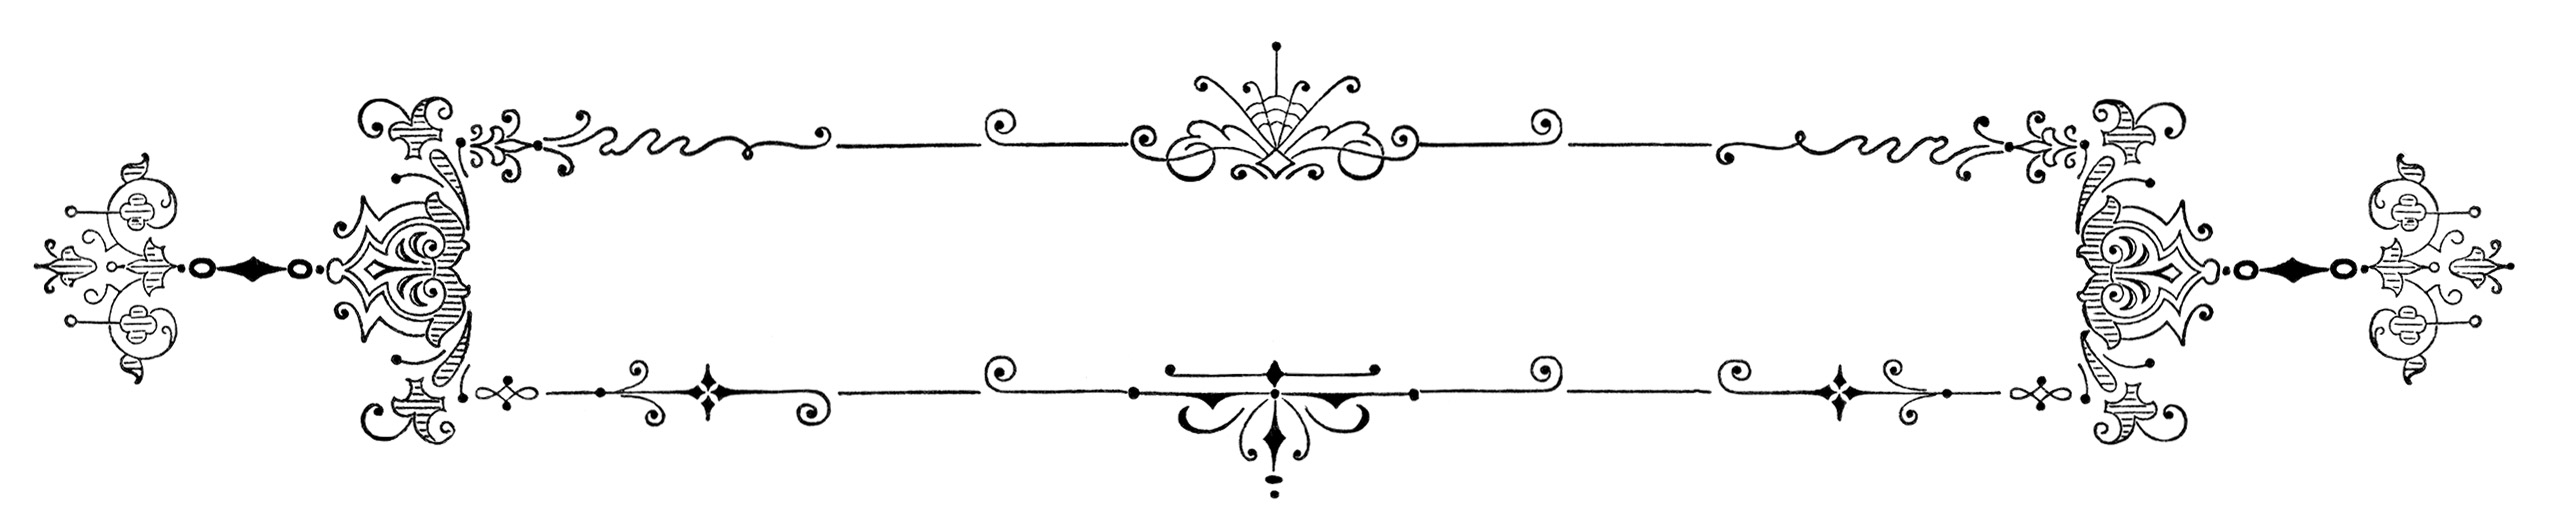 Free Vintage Lines Cliparts, Download Free Clip Art, Free.